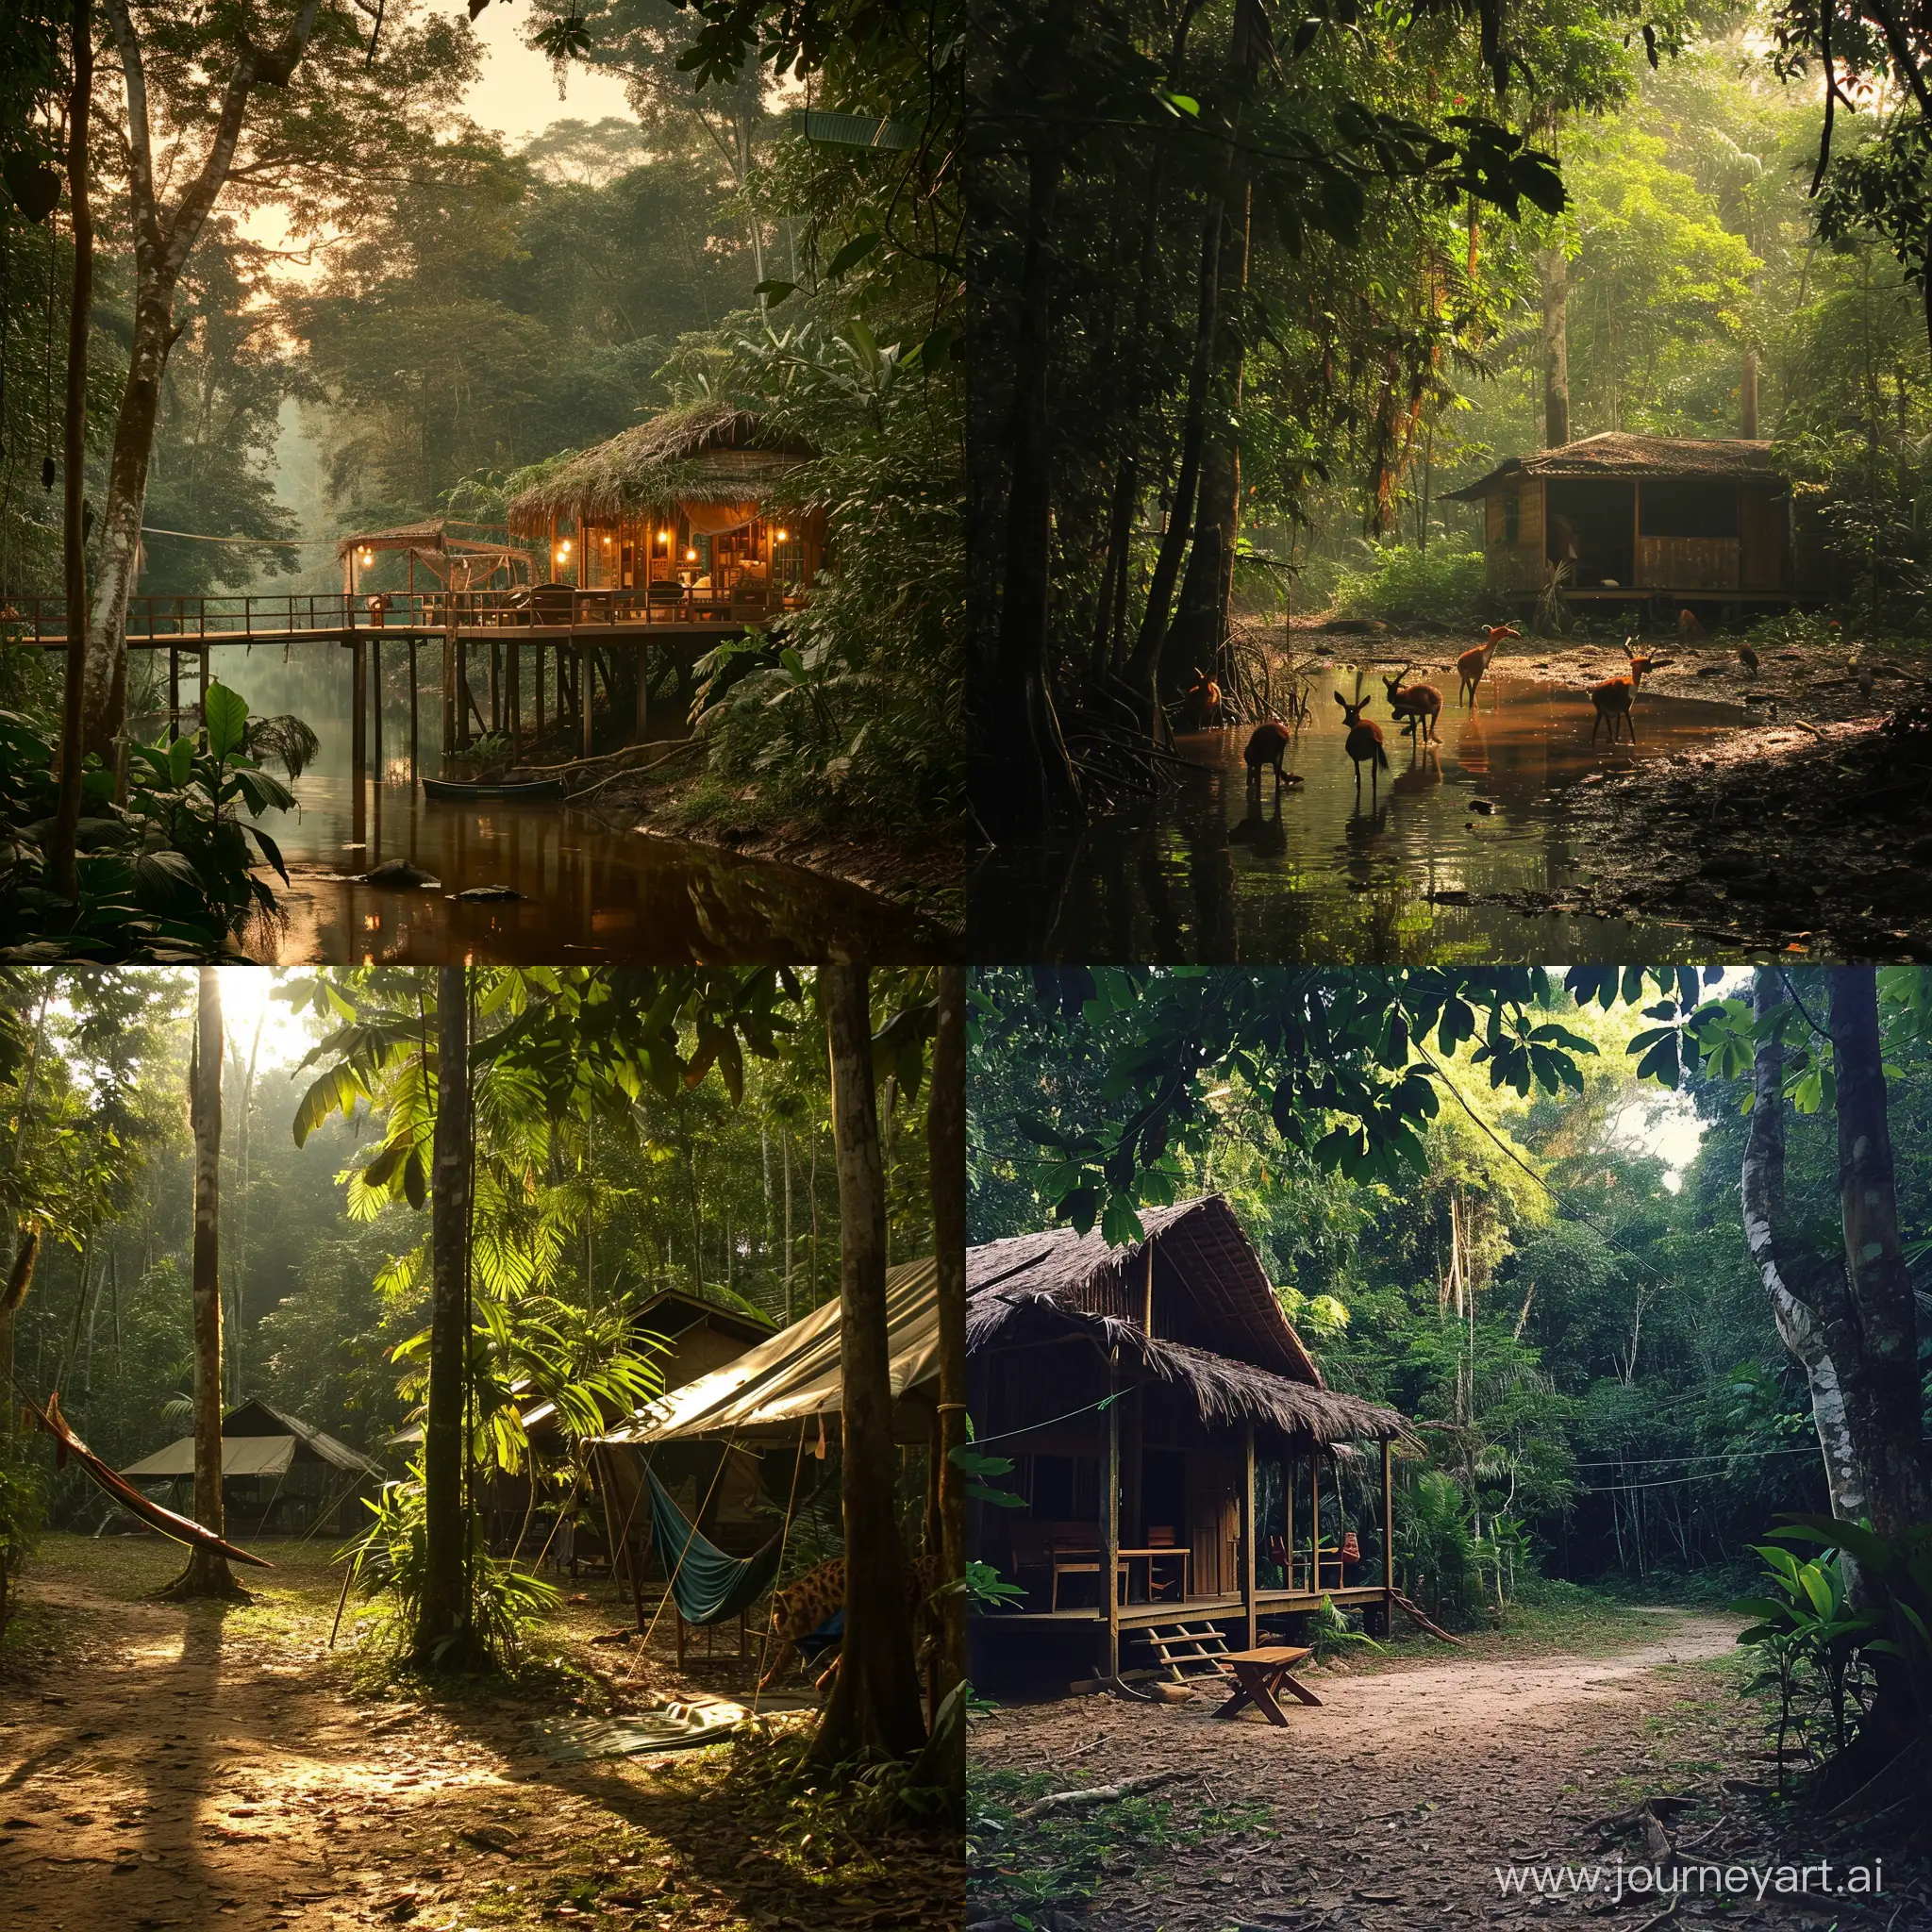 a deep Amazon jungle camp, the chorus of wildlife, the heart of nature beats strongly, poetic
